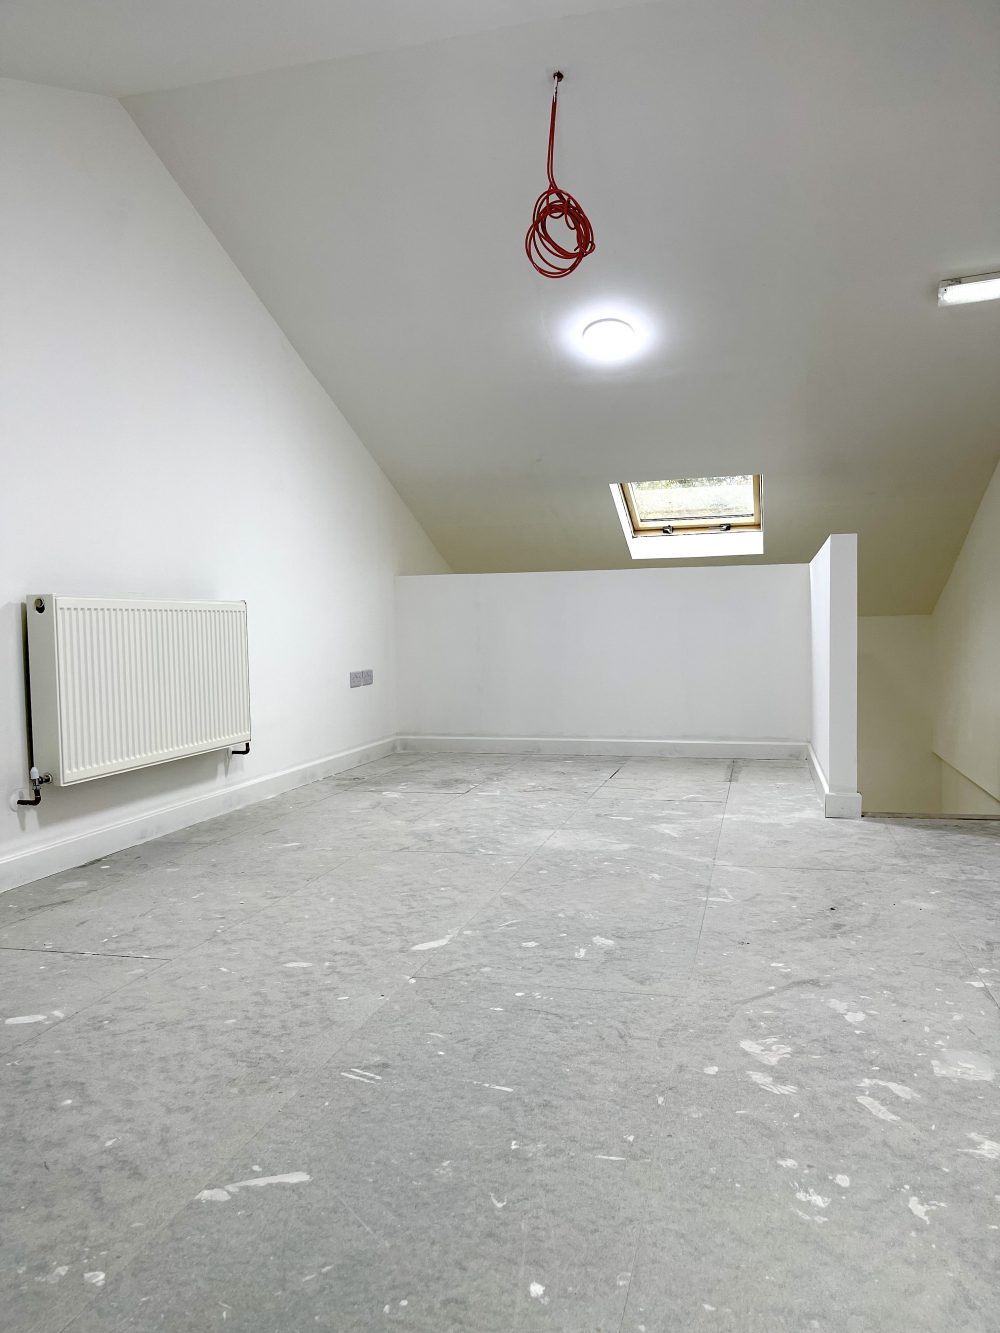 Creative live work style Studio flat Available to rent in EN3 Enfield Alxandra rd Pic13